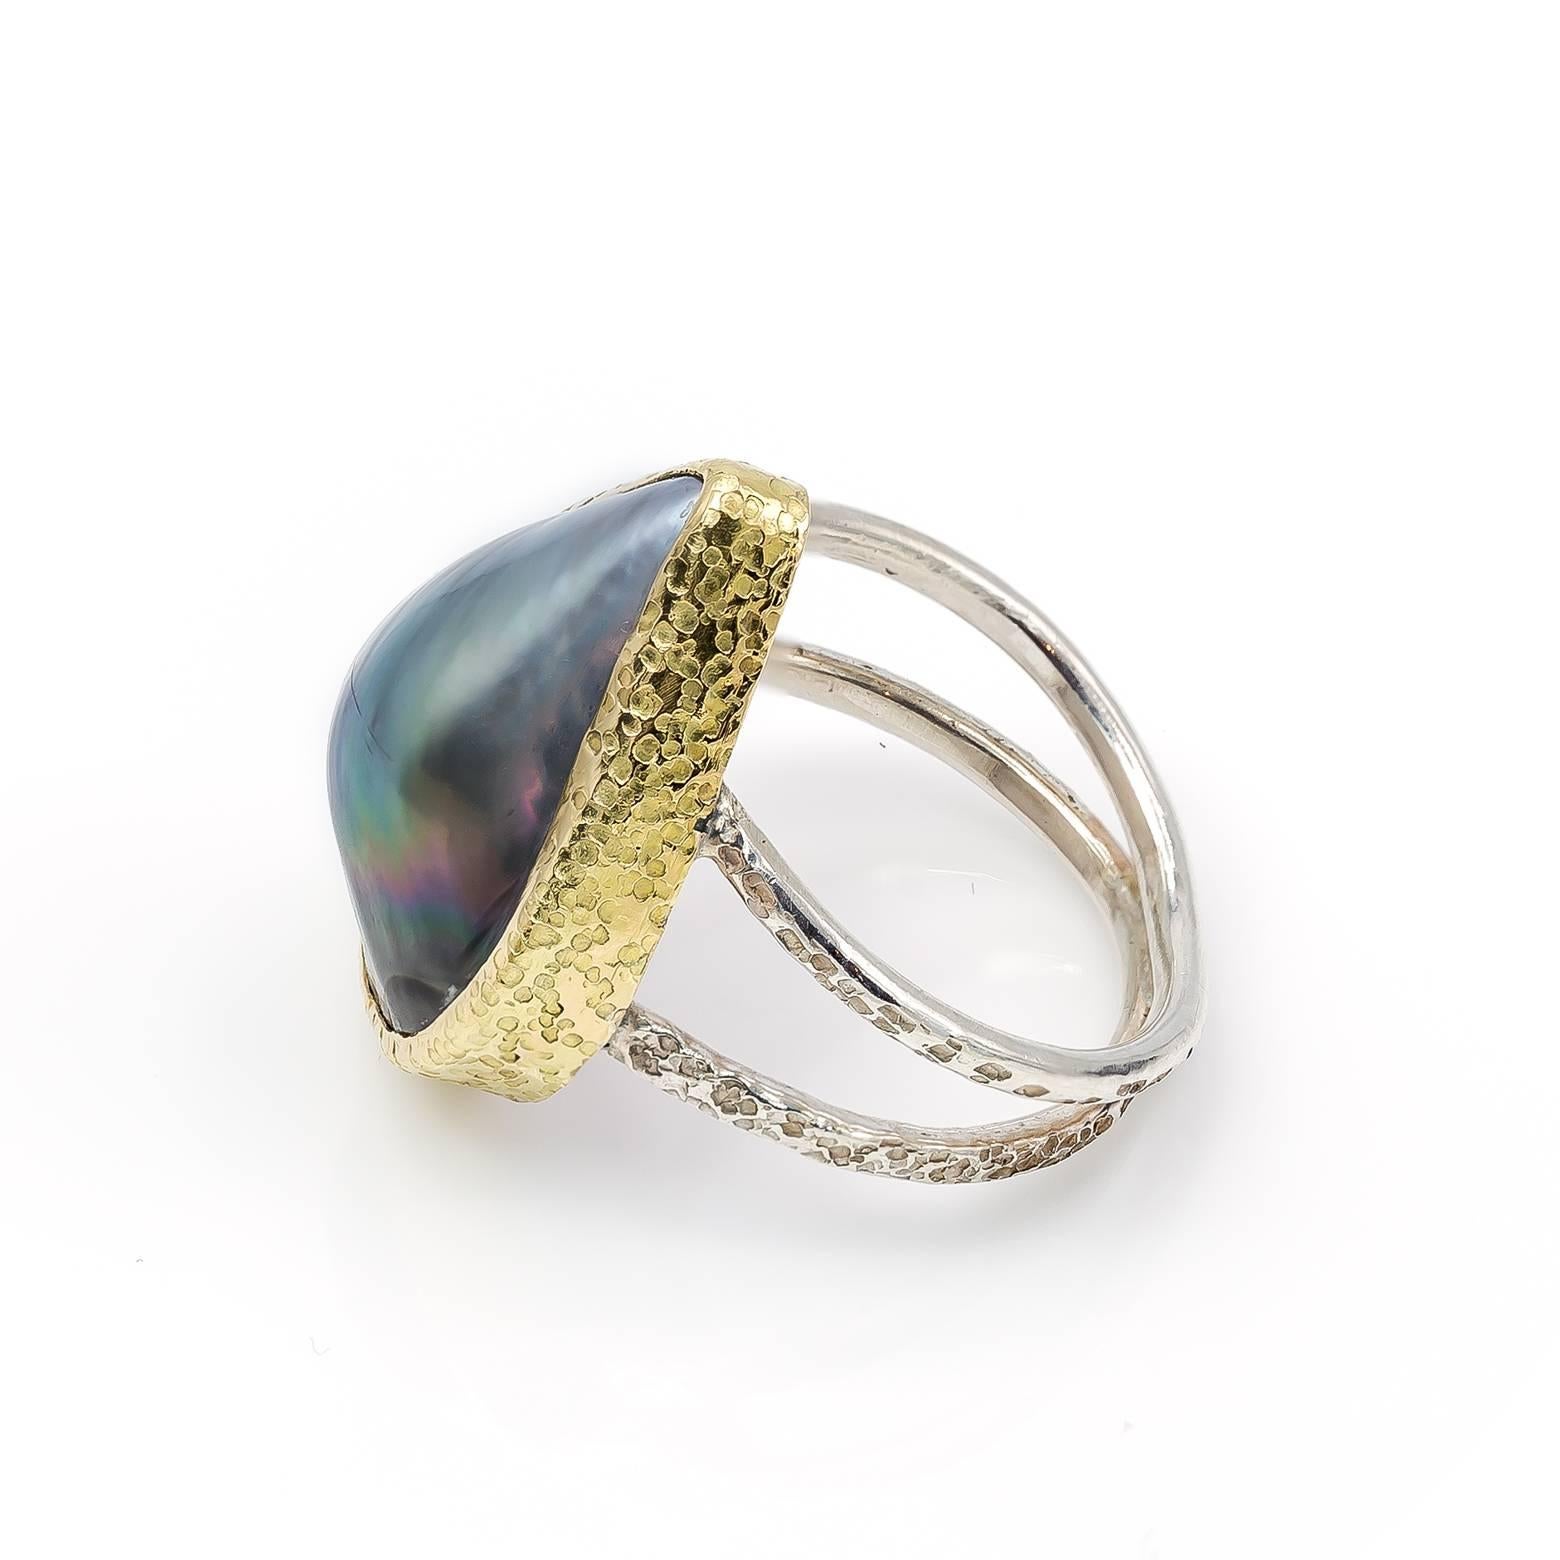 Women's Black Mabe Peal Ring Tear Shaped in Gold and Sterling Silver